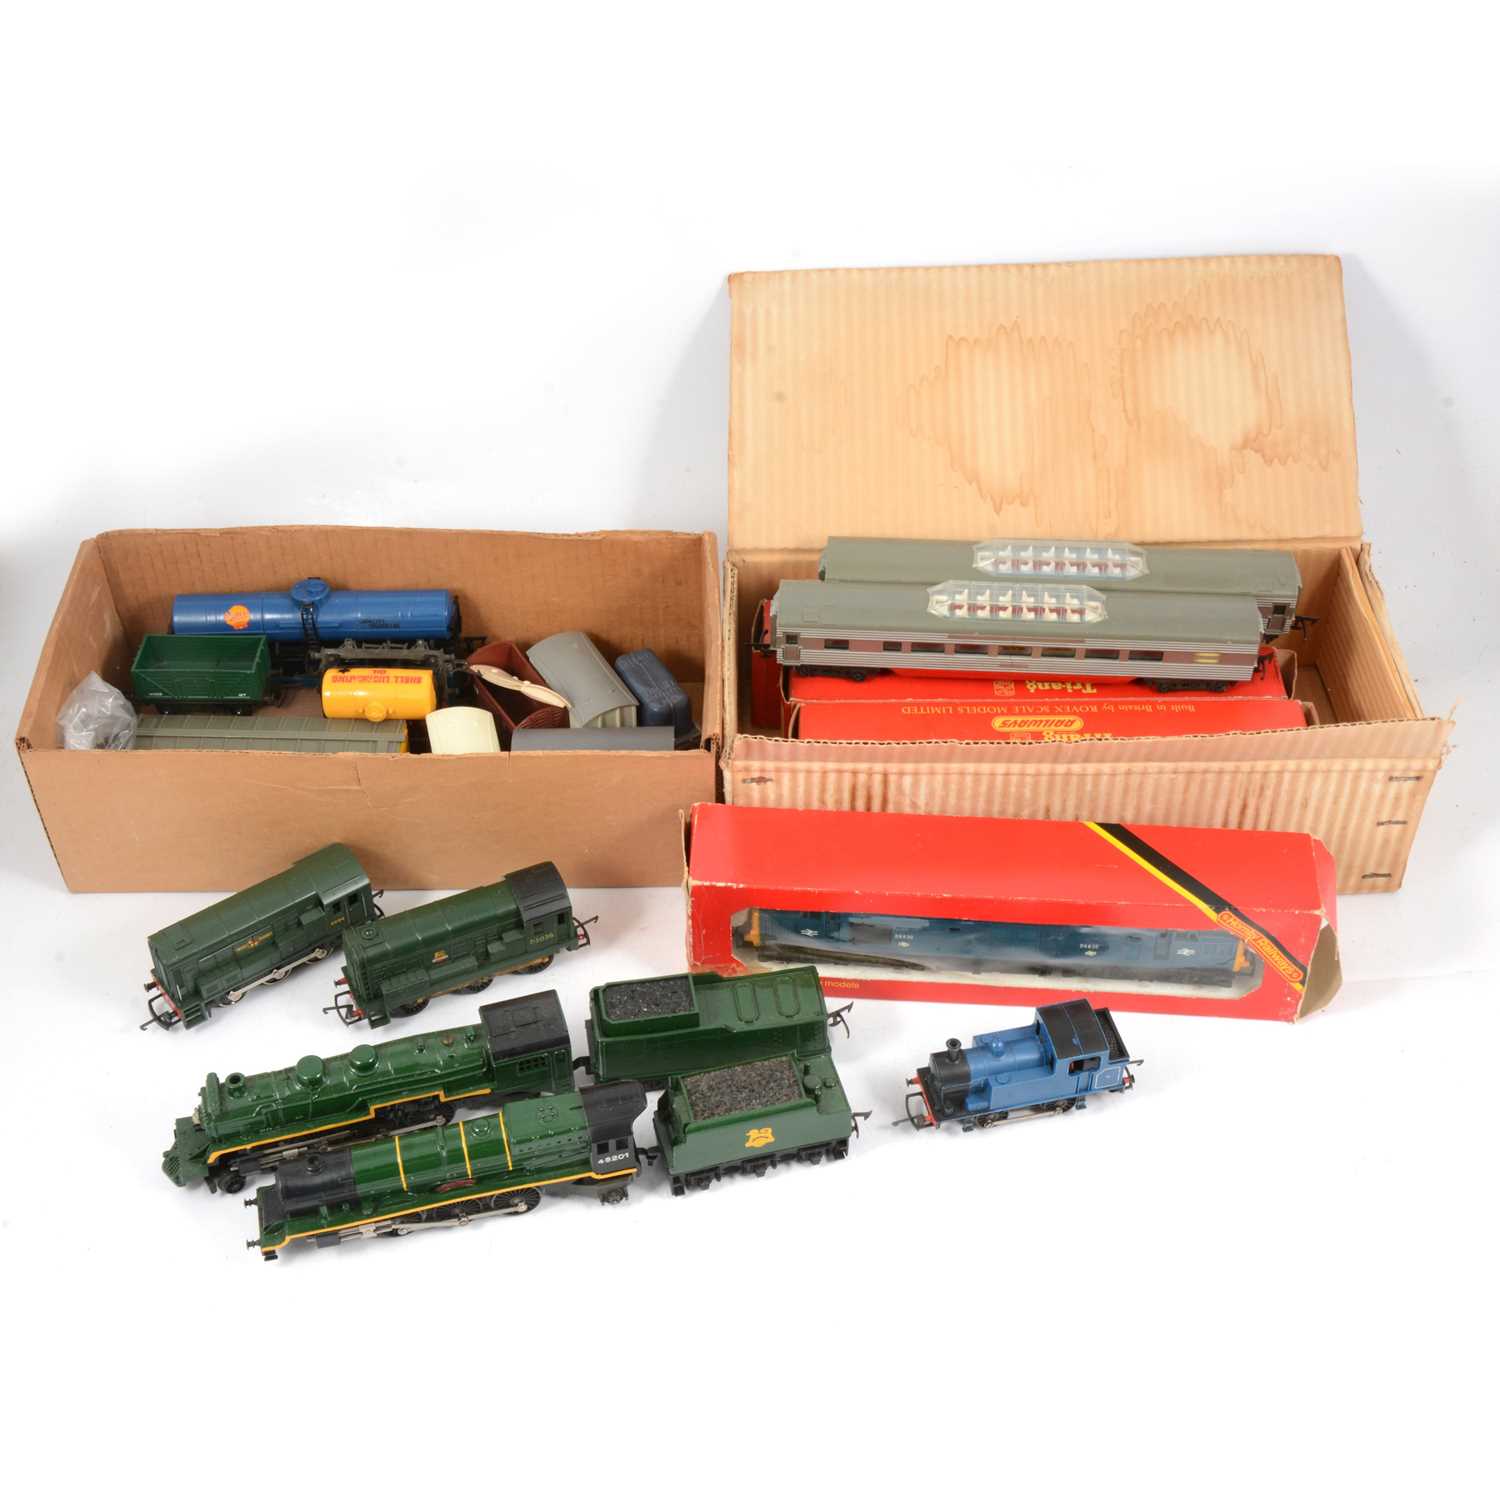 Lot 83 - OO gauge model railway, a collection including Hornby R751 Class 37 D6830 diesel locomotive